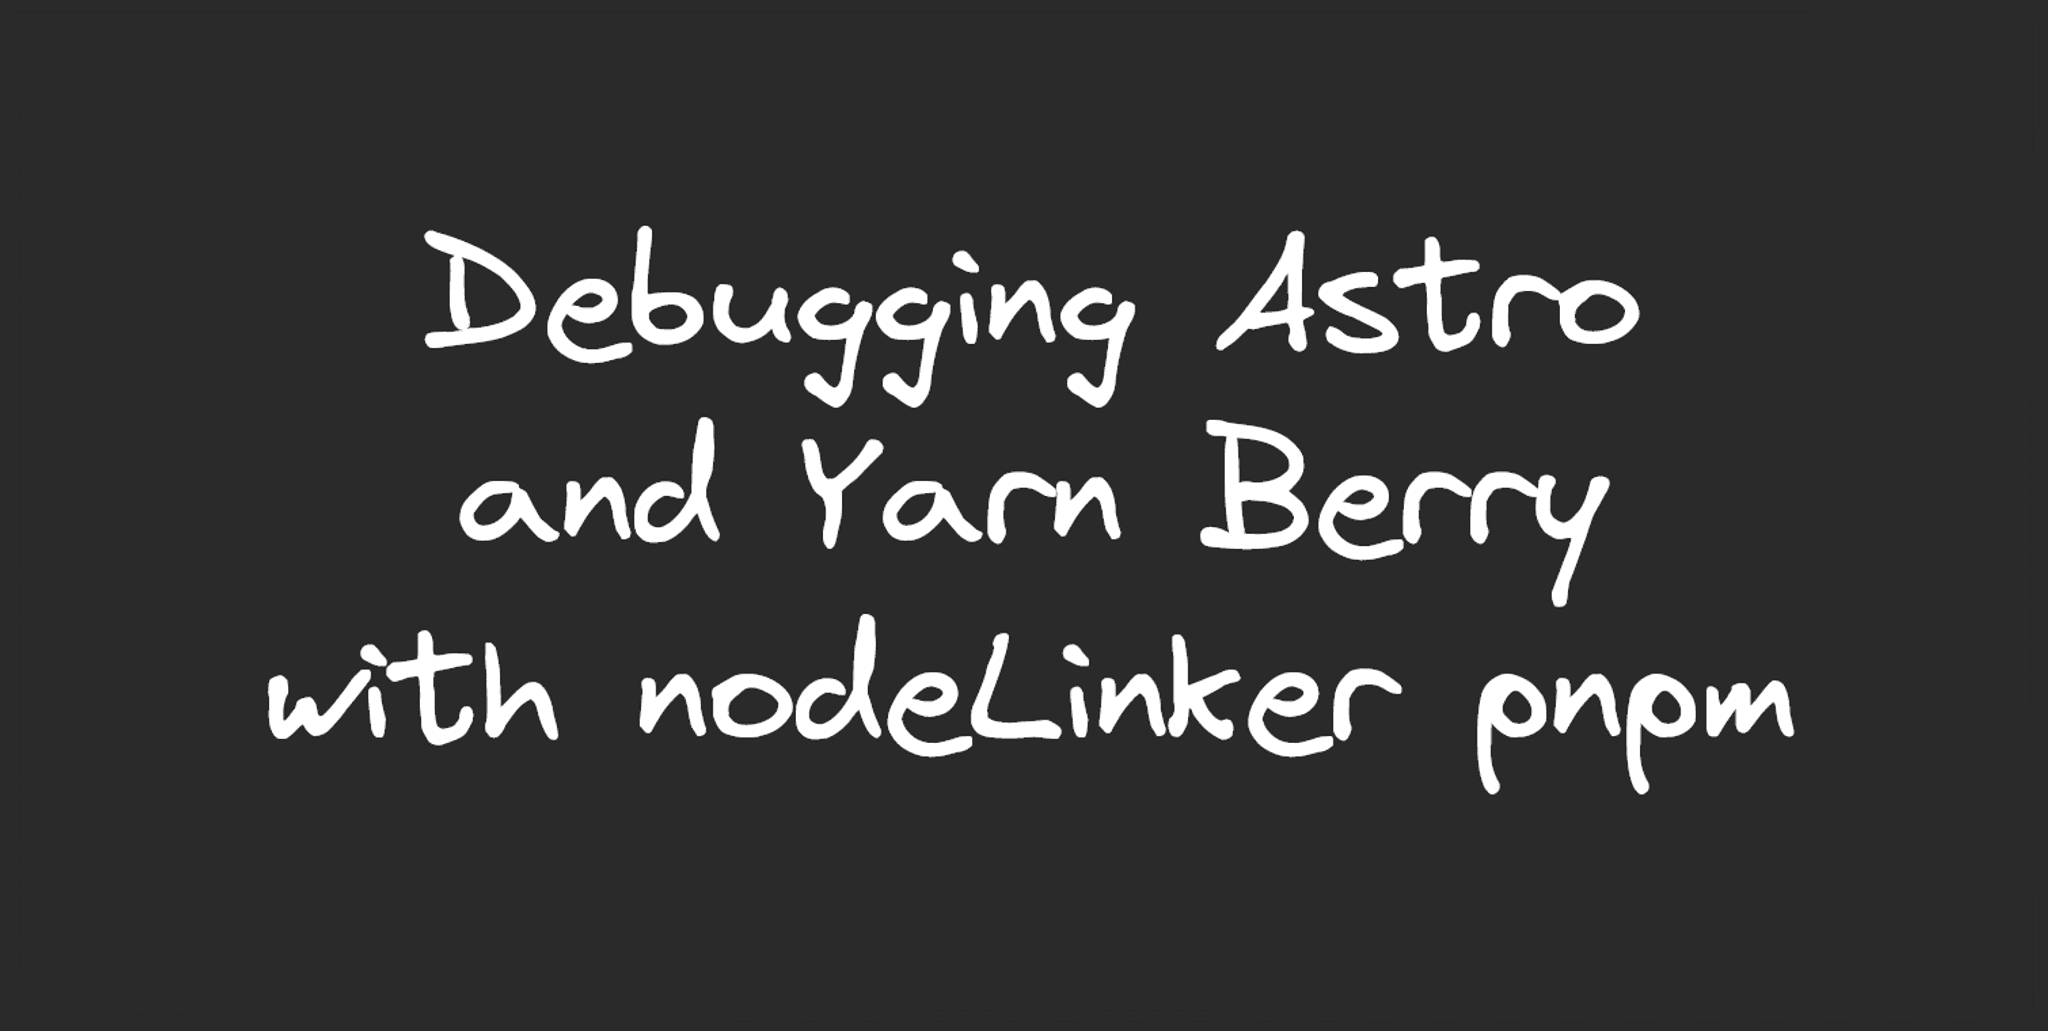 An image containing the text, "Debugging Astro and Yarn Berry with nodeLinker pnpm".